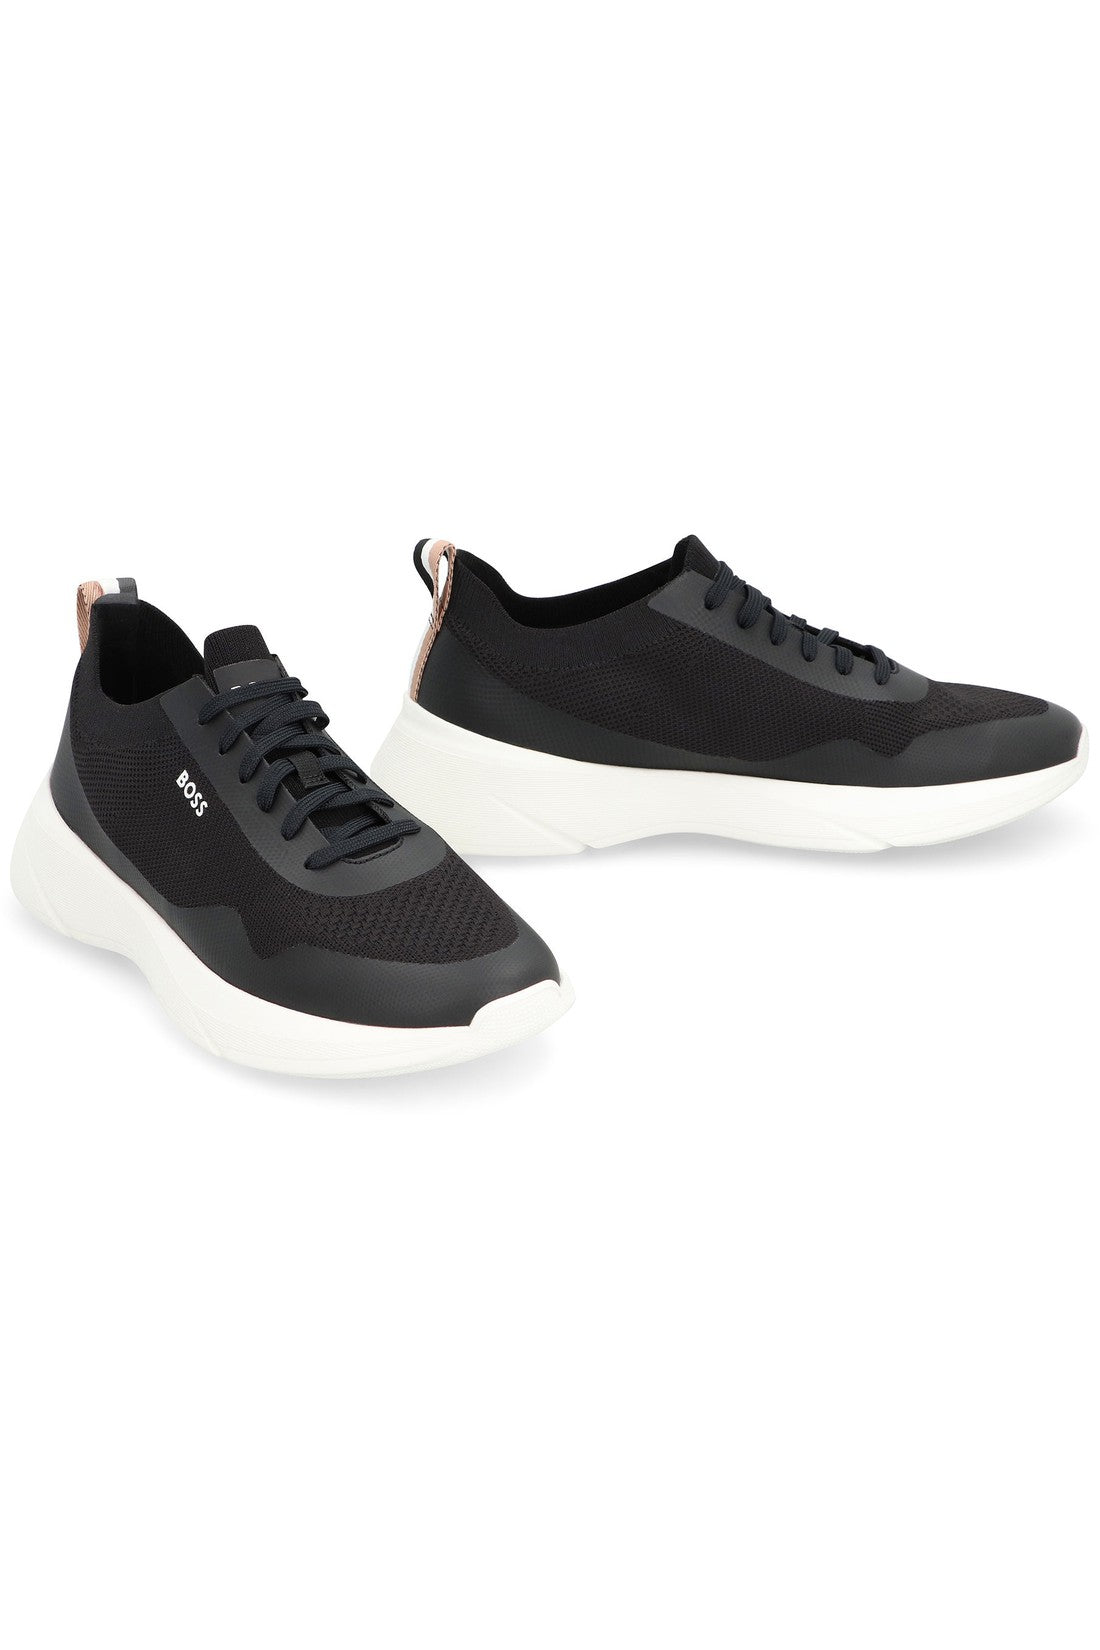 BOSS-OUTLET-SALE-Dean fabric low-top sneakers-ARCHIVIST